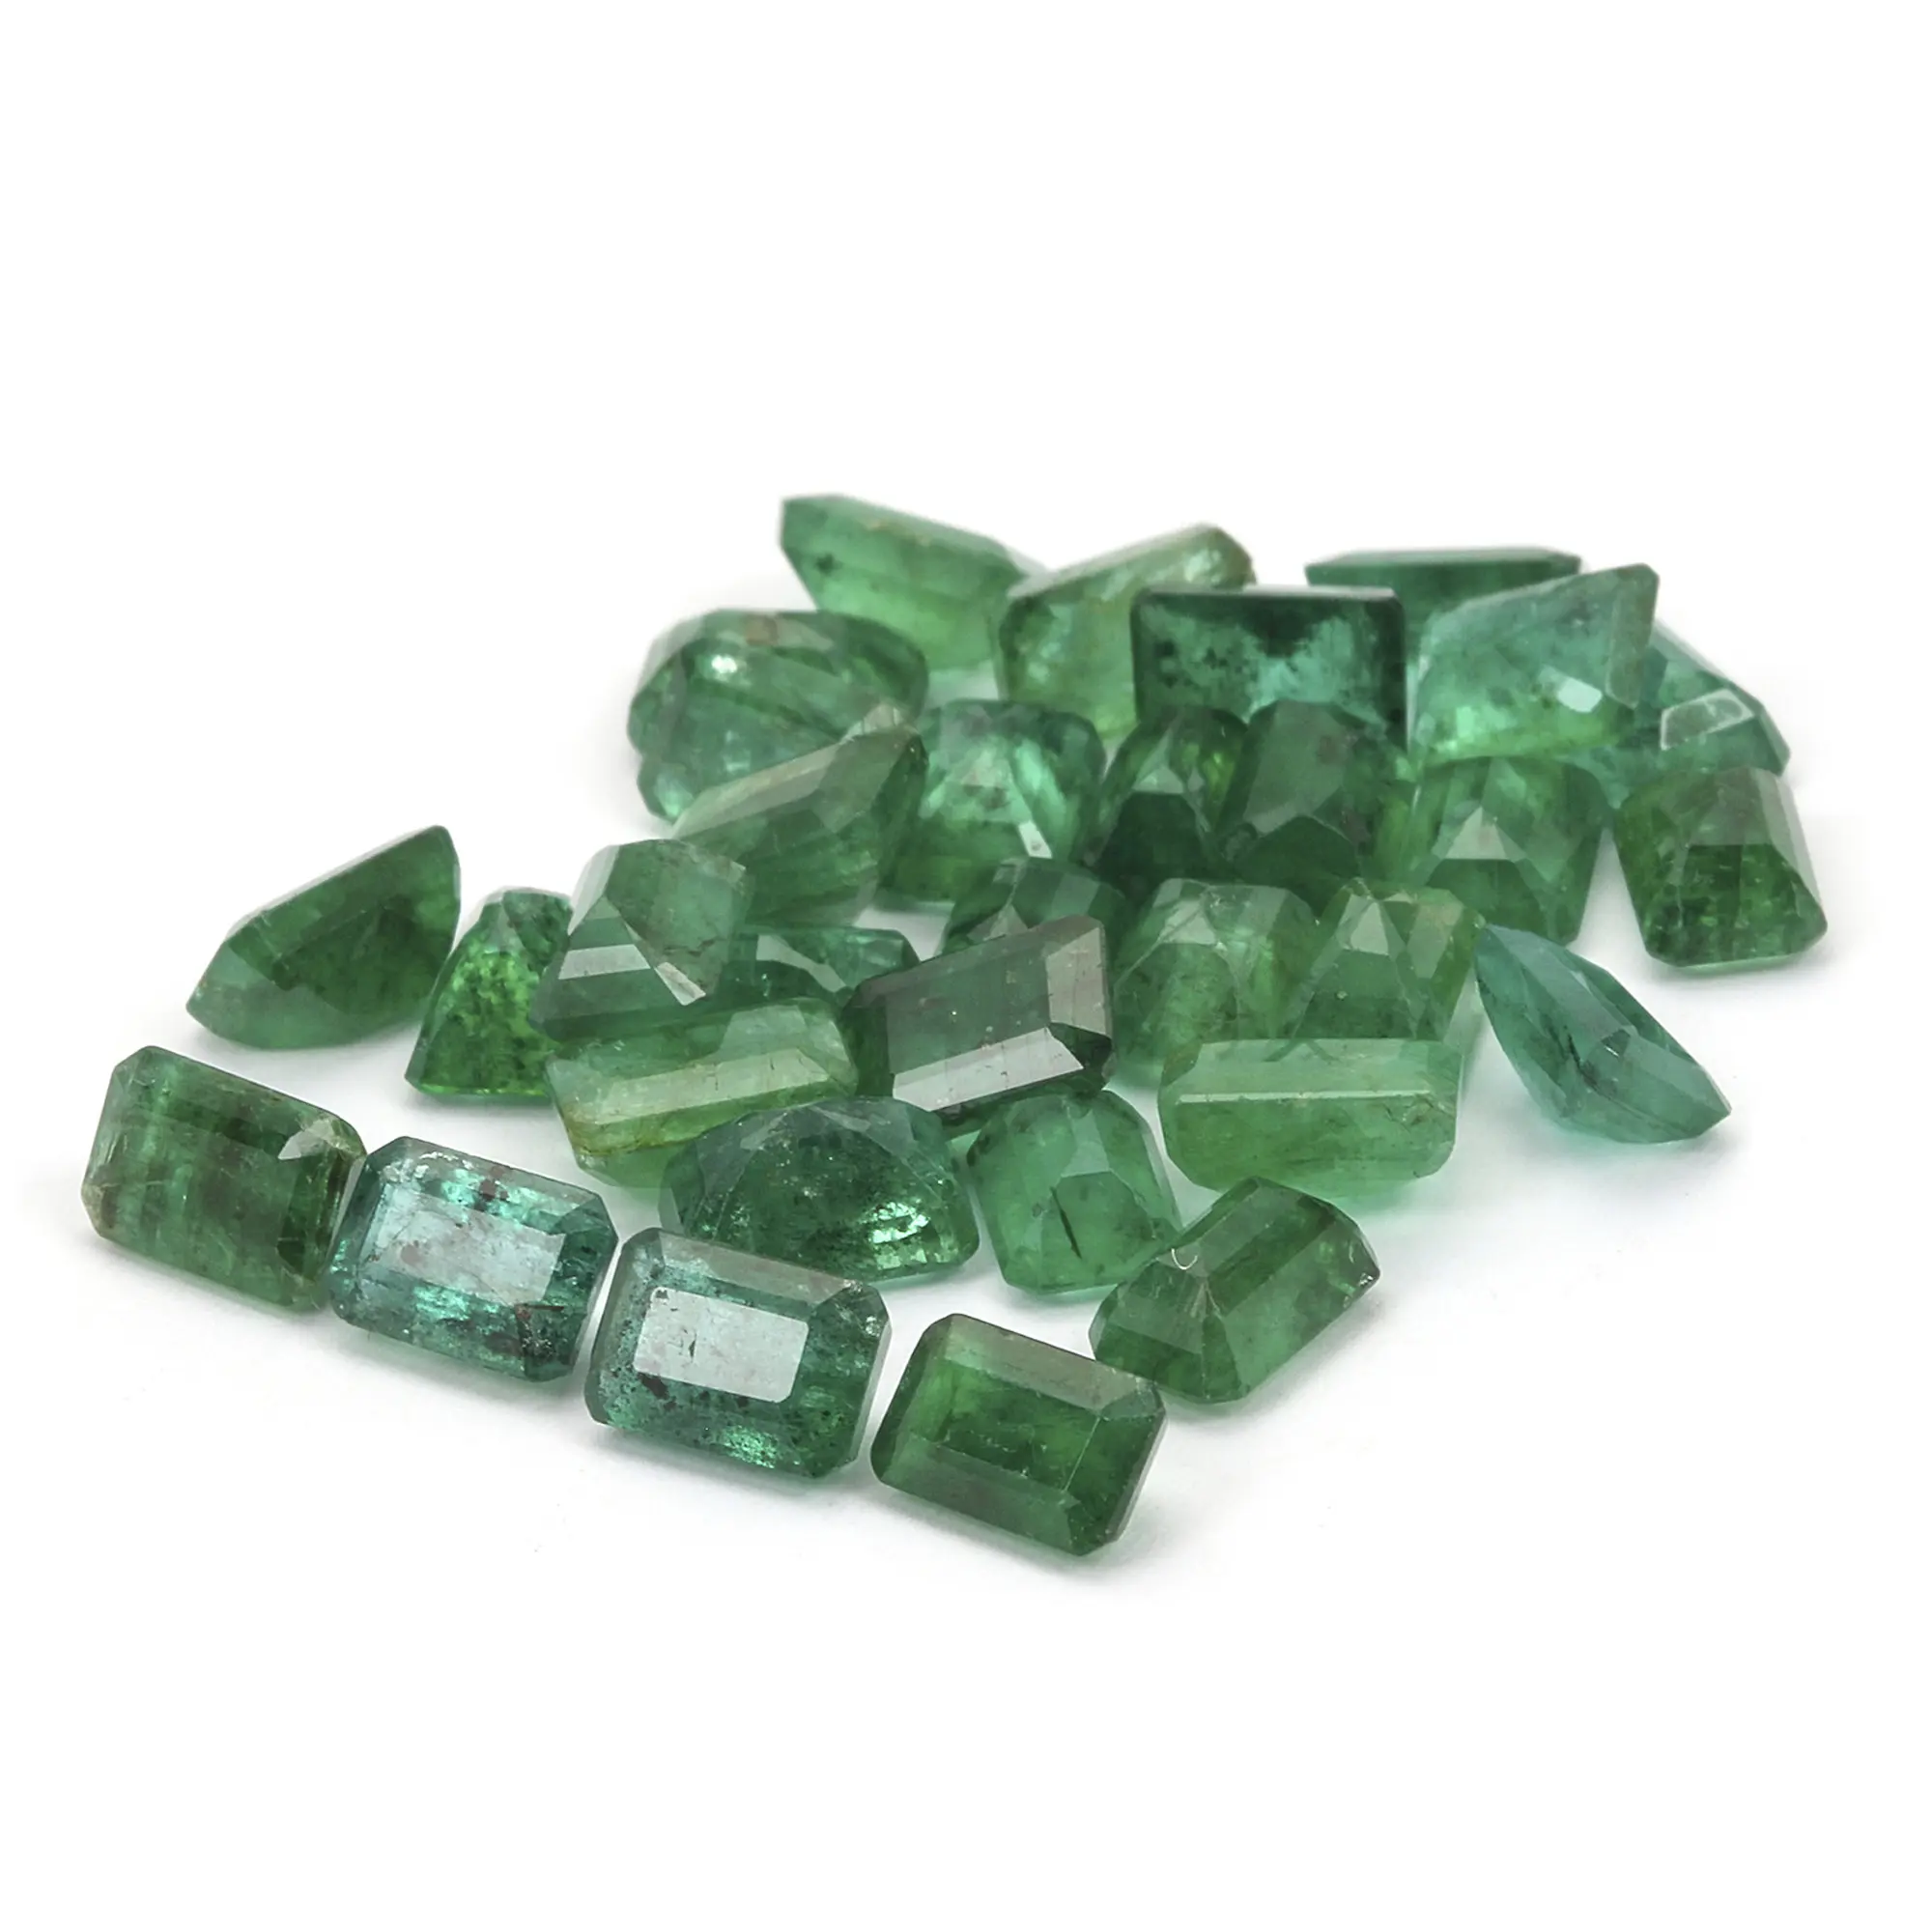 5 Carats Lot Emerald Octagon 6x4mm Approx. 8 Pieces Natural Emerald Stone Faceted Cut Green Gemstone for Making Jewelry